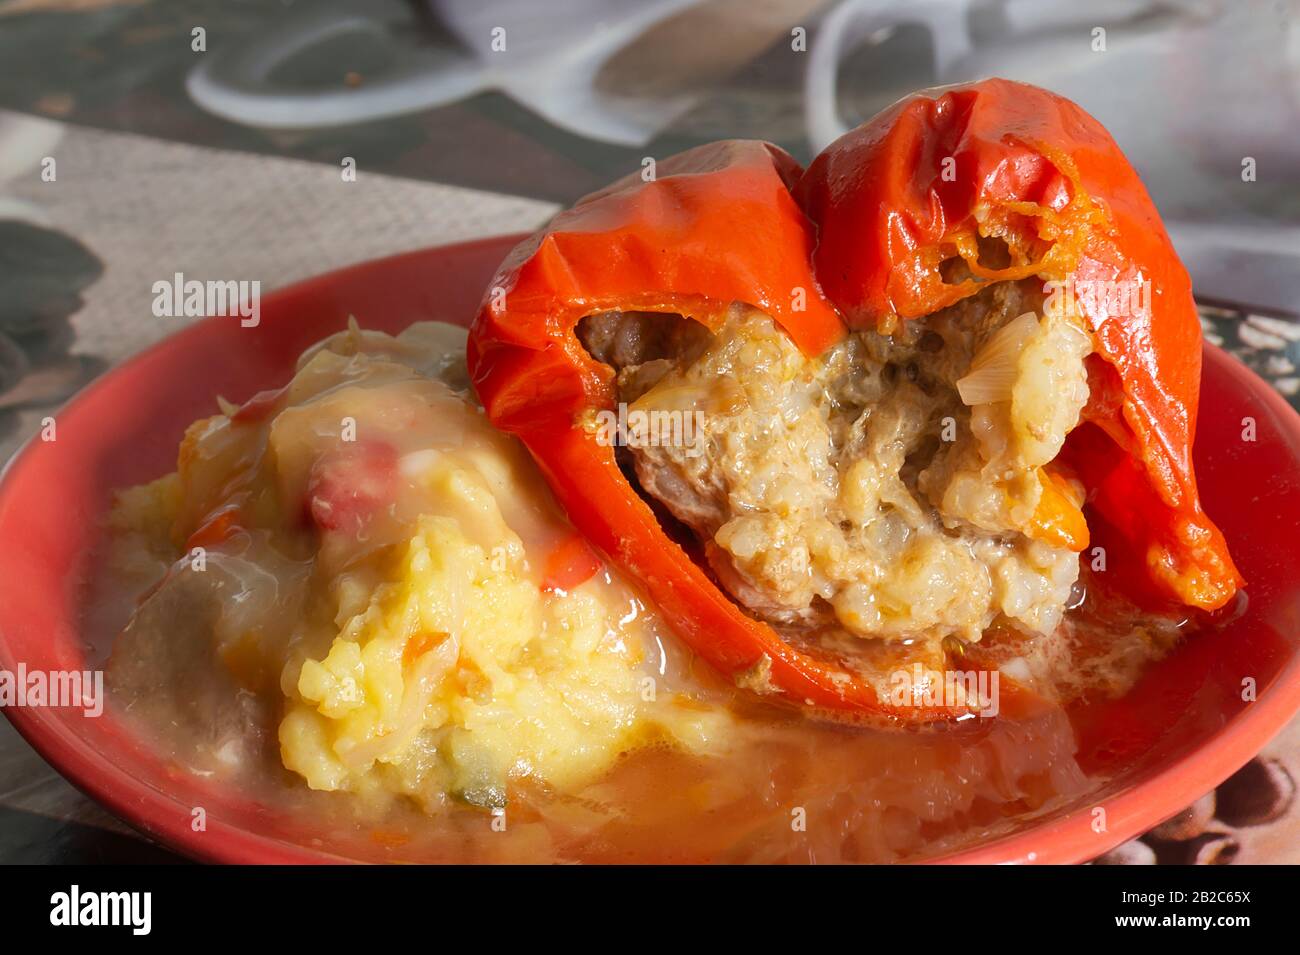 The Red pepper with stuffing and mashed potatoes in plate. The Hot dinner on table. Close-up of the products of the feeding Stock Photo